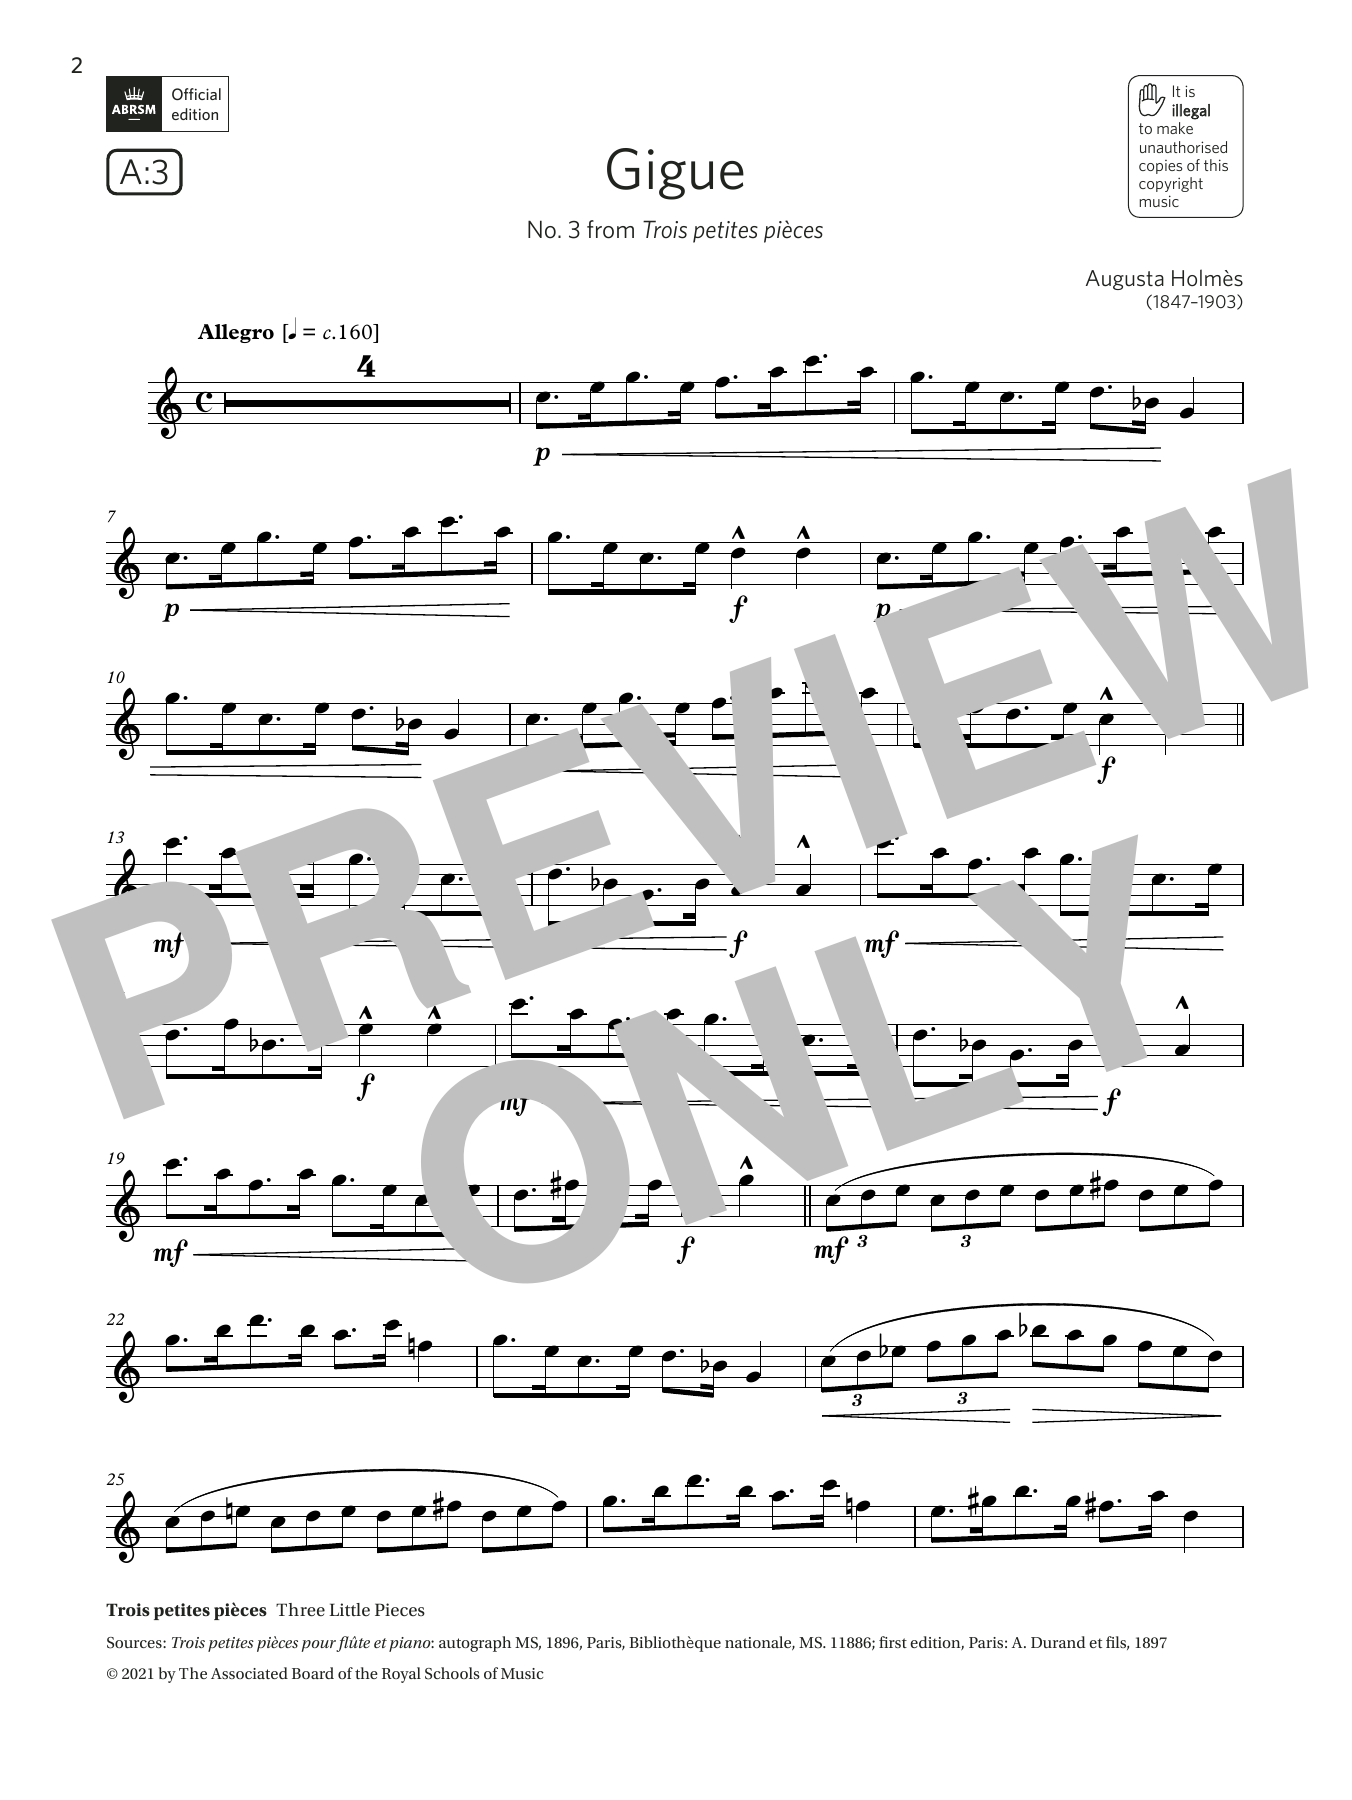 Gigue (No. 3 from Trois petites pices) (Grade 5 List A3 from the ABRSM Flute syllabus from 2022) (Flute Solo) von Augusta Holms